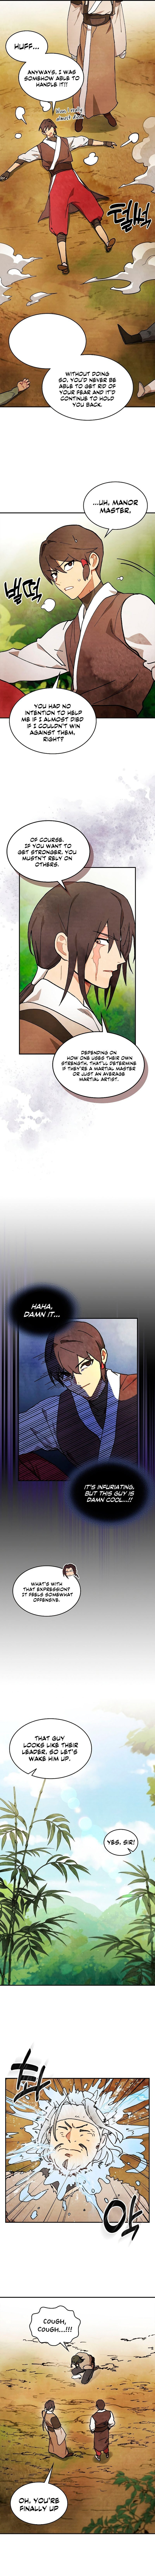 chronicles-of-the-martial-gods-return-chap-31-3